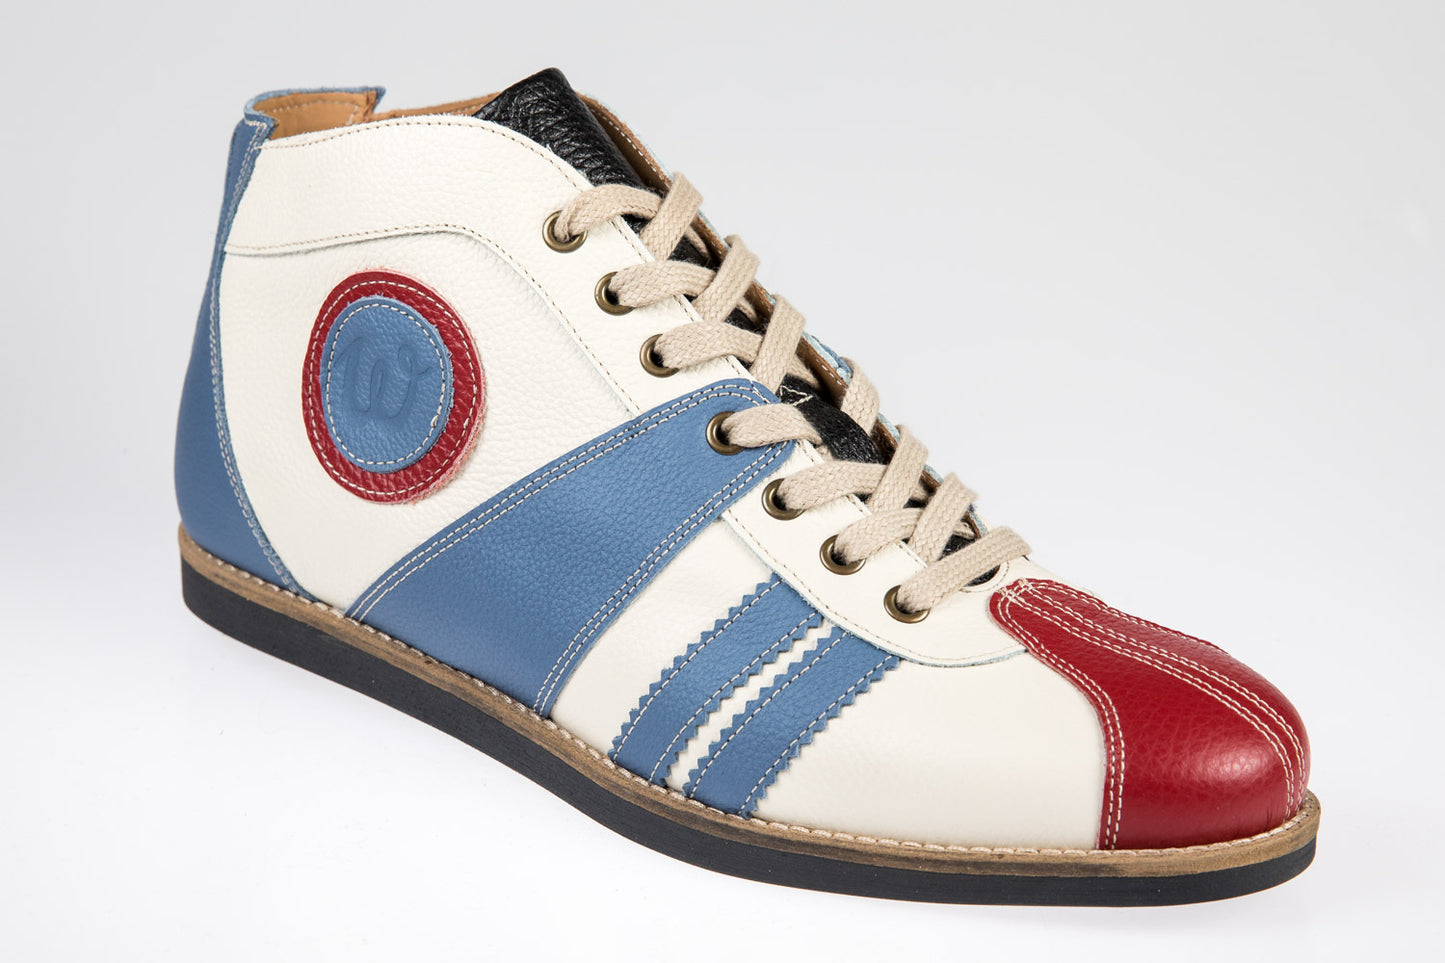 The Racer blue/white/red